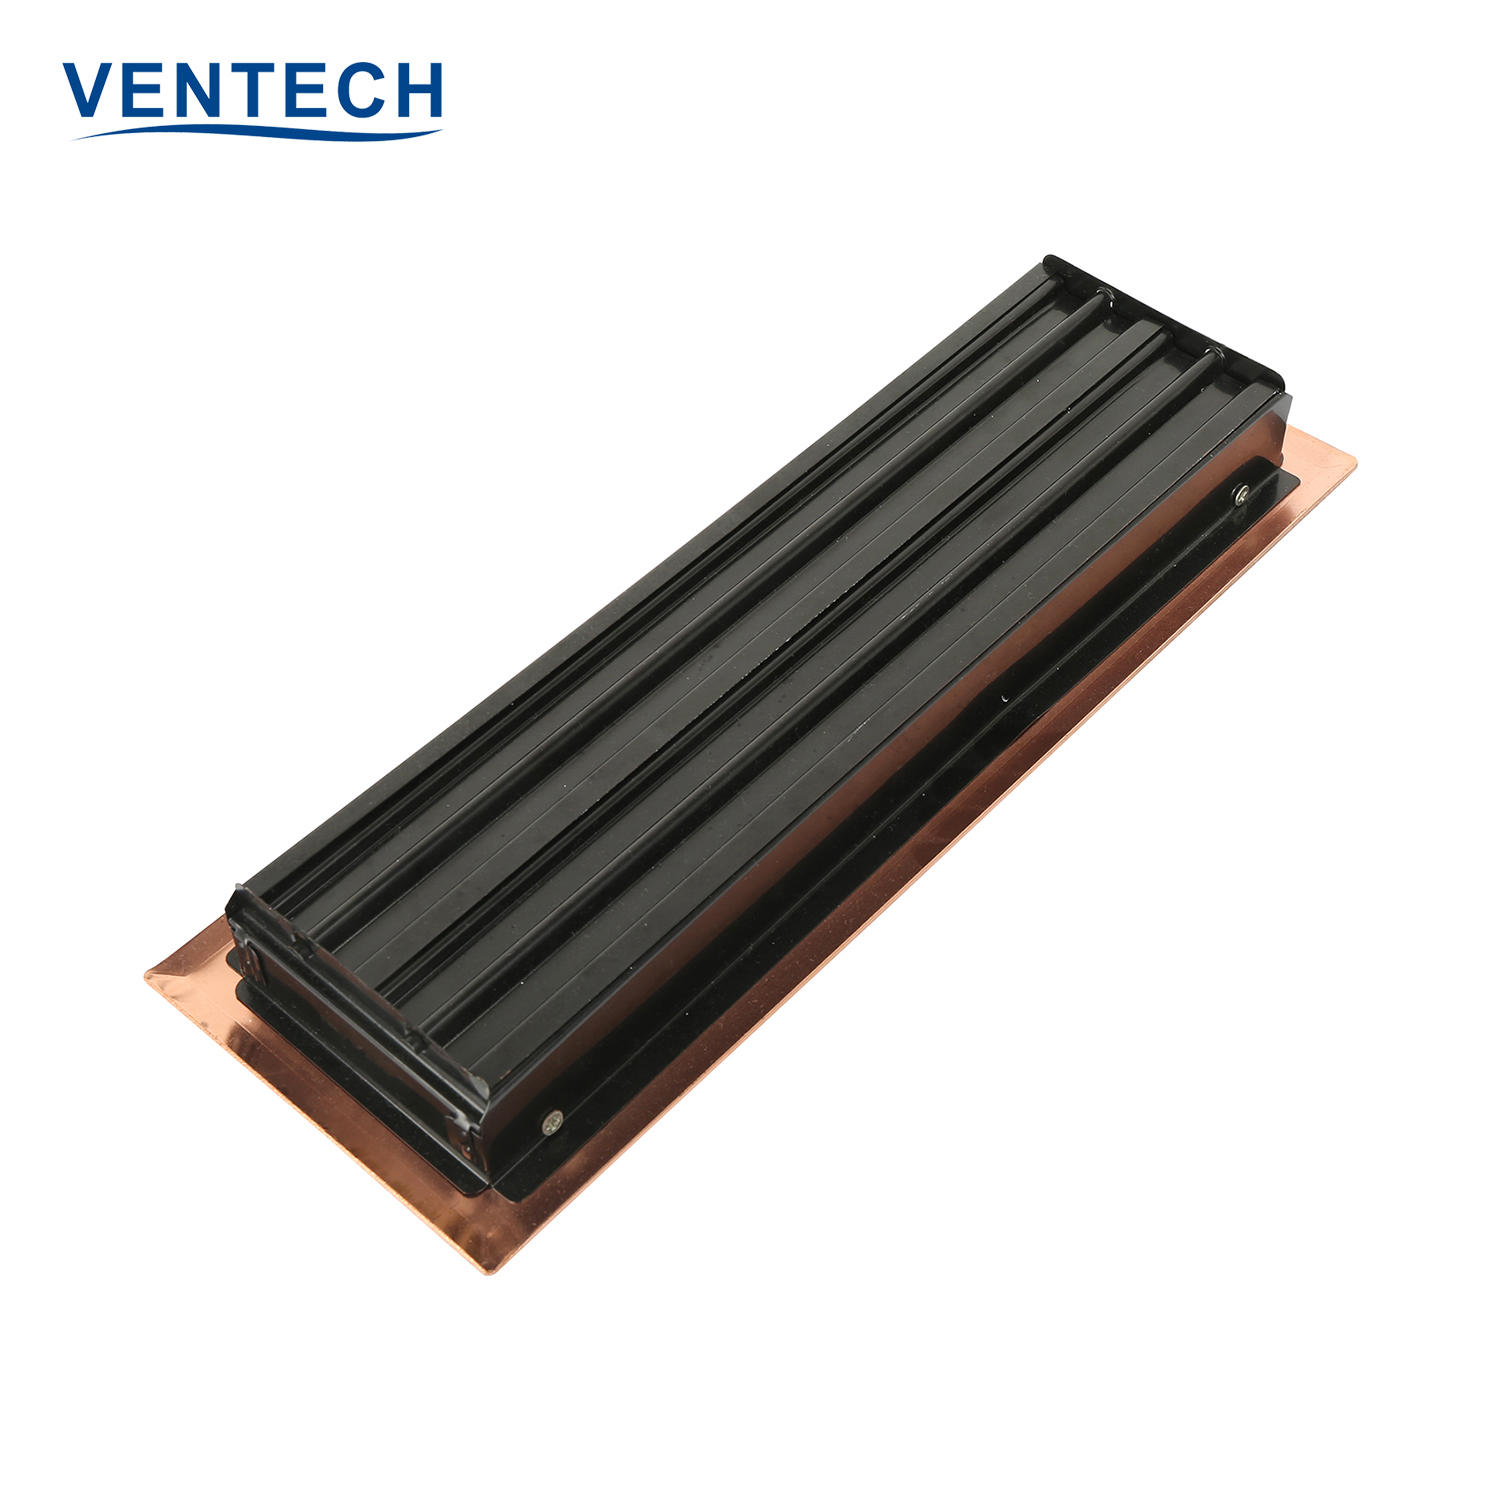 VENTECH Exhaust Wholesale High Quality Hvac System Conditioning Supply Fresh Air America Aluminum Ventilation Floor Vent Grilles